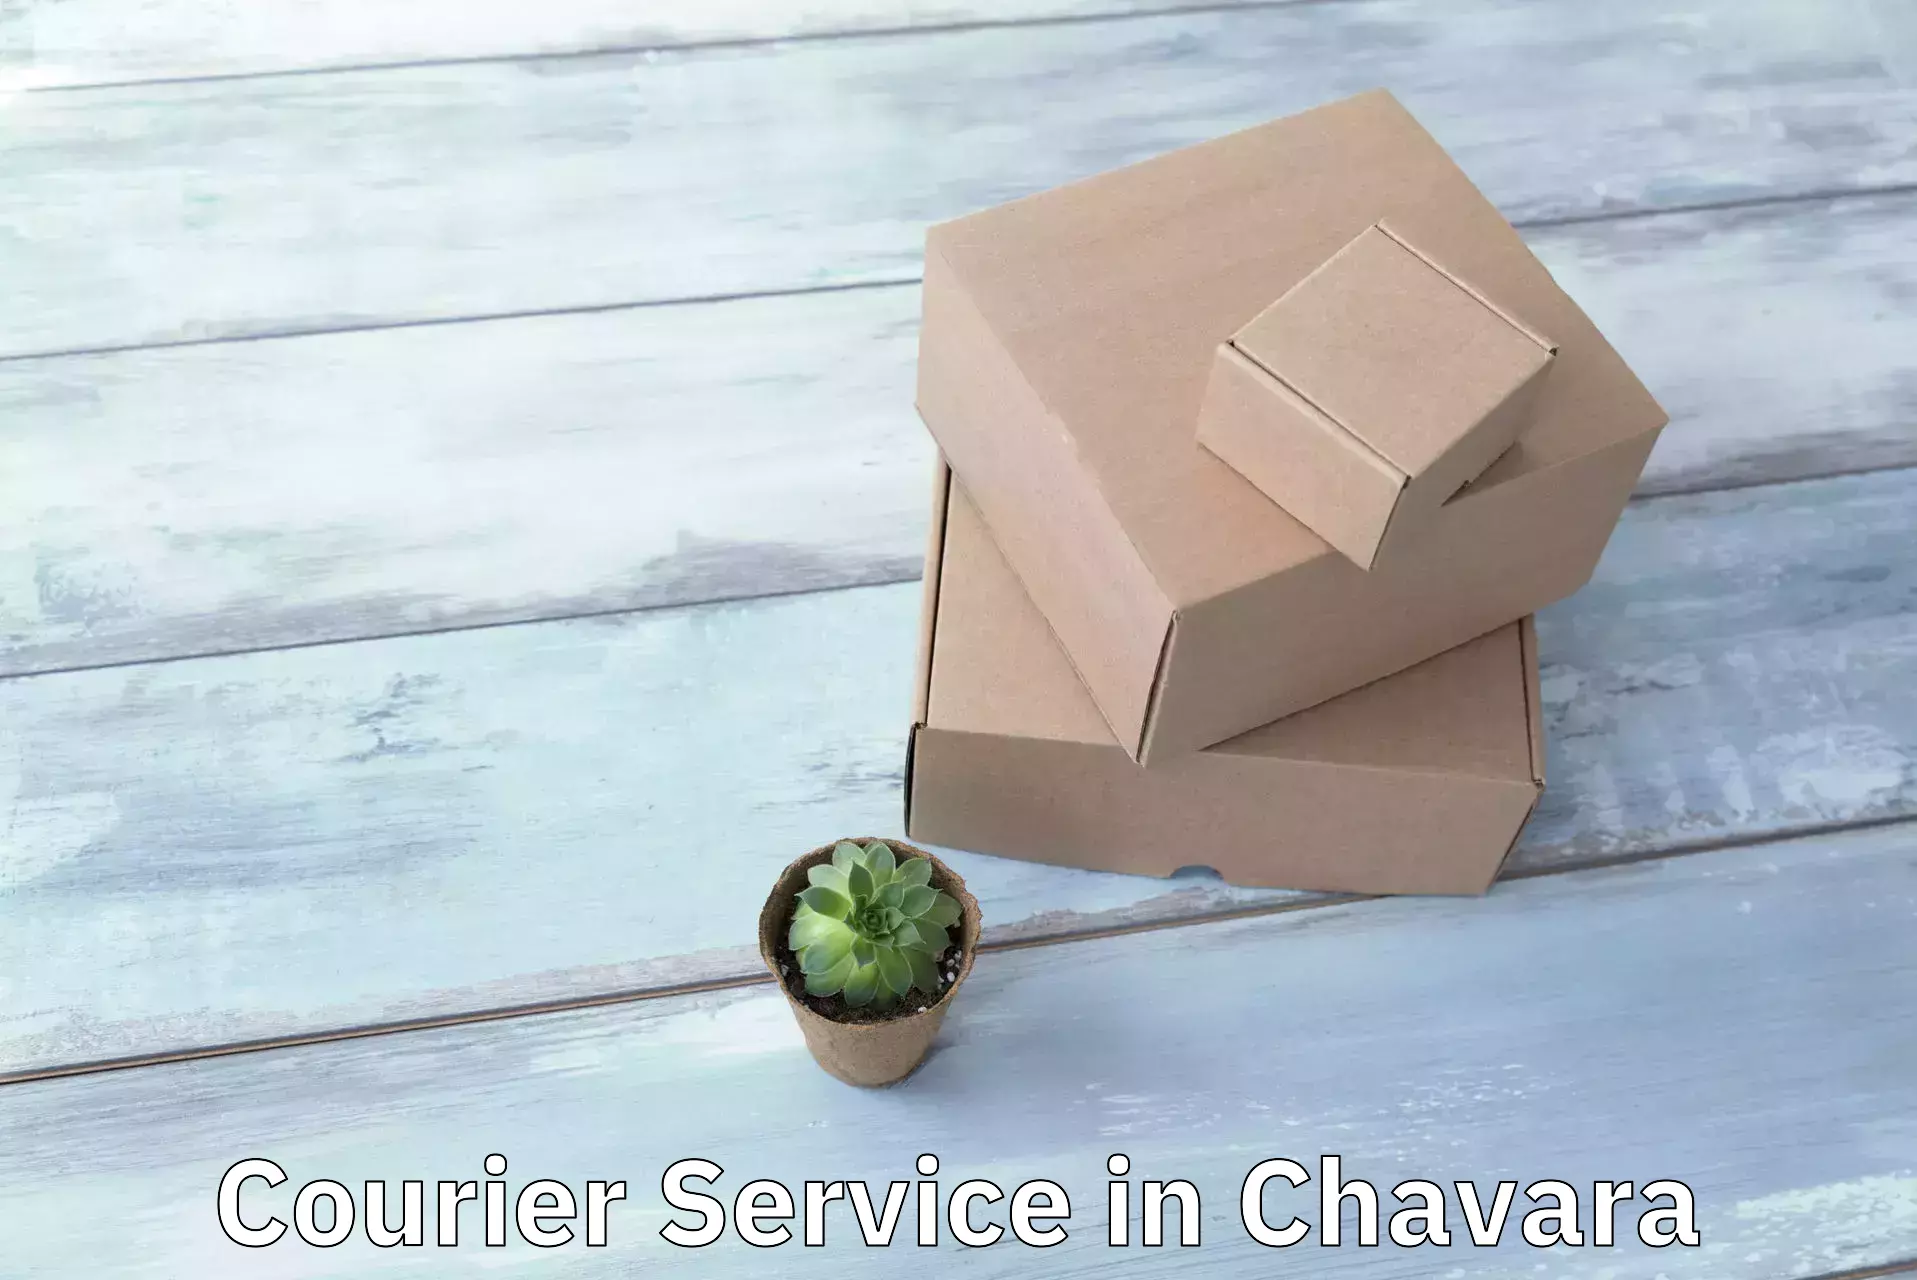 Comprehensive shipping services in Chavara